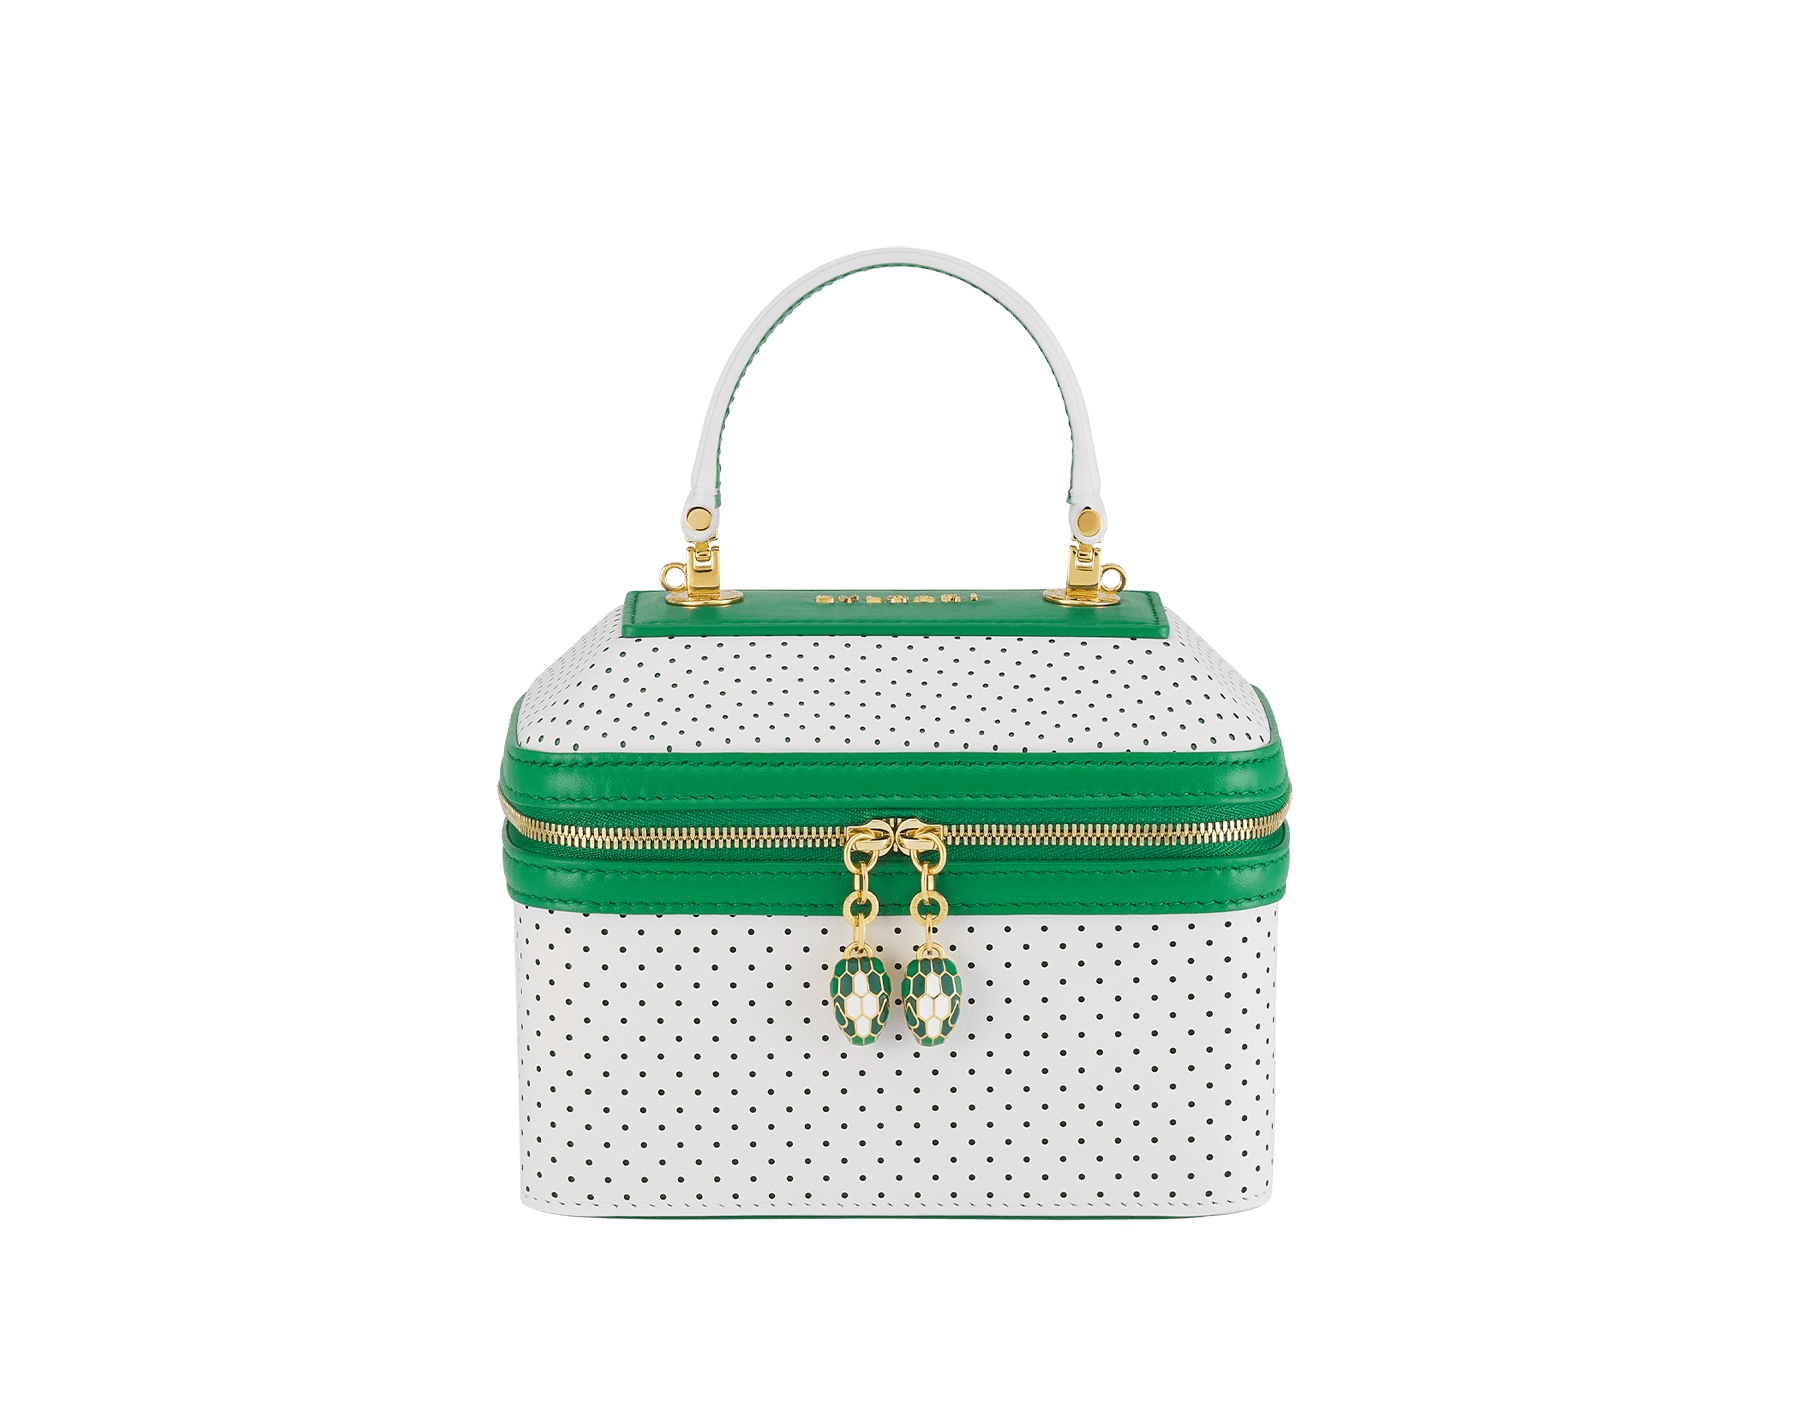 Casablanca x Bulgari small jewelry box bag in white Tennis Groundstroke perforated calf leather with smooth tennis green calf leather inserts and tennis green nappa leather lining. Captivating snakehead zip pullers in gold-plated brass embellished with dégradé green and bright white enamel scales, and green malachite eyes. 292332 image 1